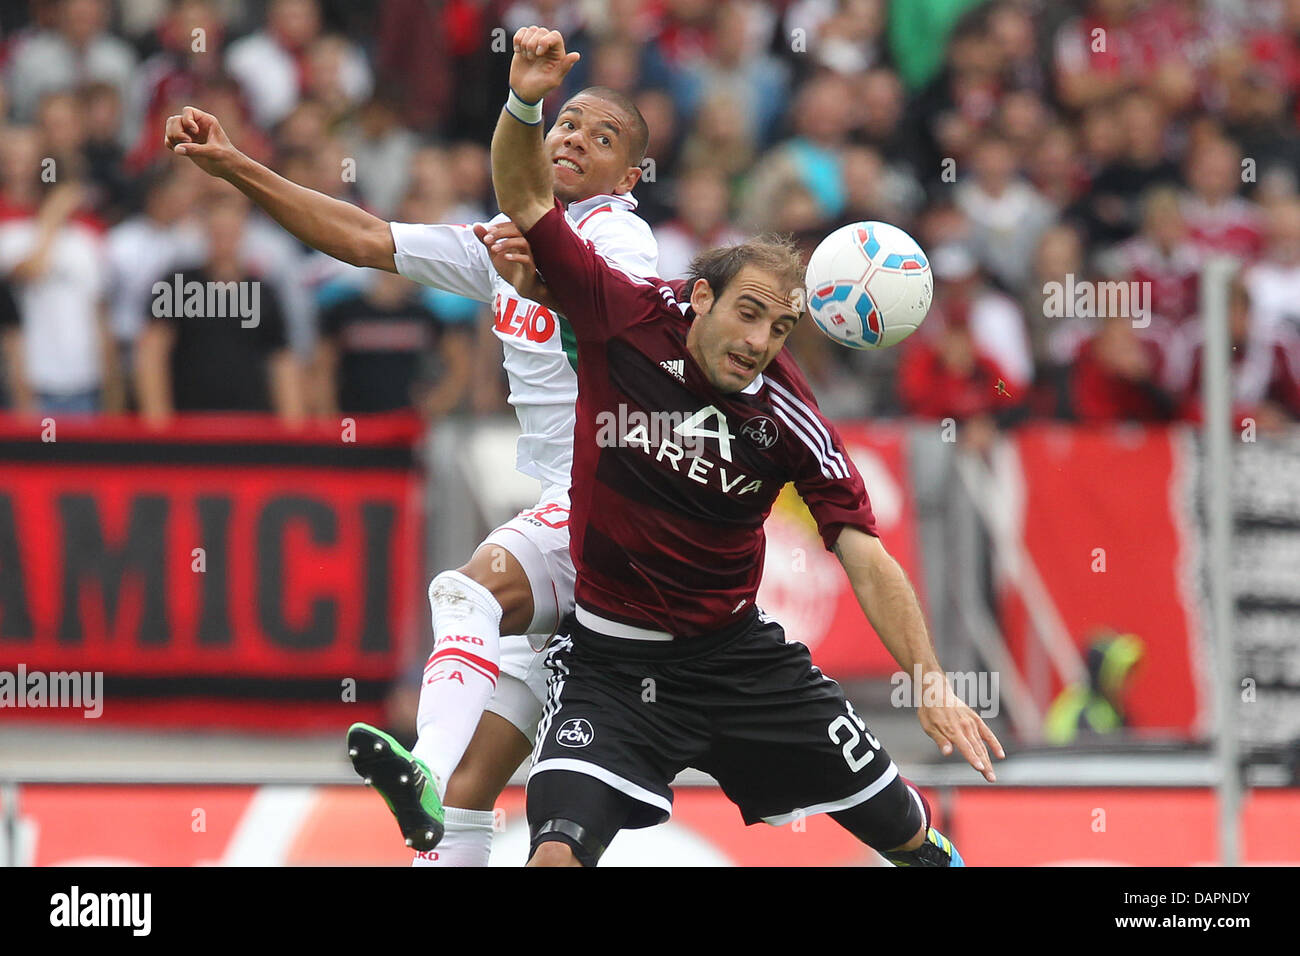 Nuremberg's Javier Horacio Pinola (R) vies for the ball with Augsburg's Marcel Ndjeng during the German Bundesliga match 1st FC Nuremberg vs FC Augsburg at the easyCredit Stadium in Nuremberg, Germany, 27 August 2011. Nuremberg won by 1-0. Photo: DANIEL KARMANN  (ATTENTION: EMBARGO CONDITIONS! The DFL permits the further utilisation of the pictures in IPTV, mobile services and othe Stock Photo